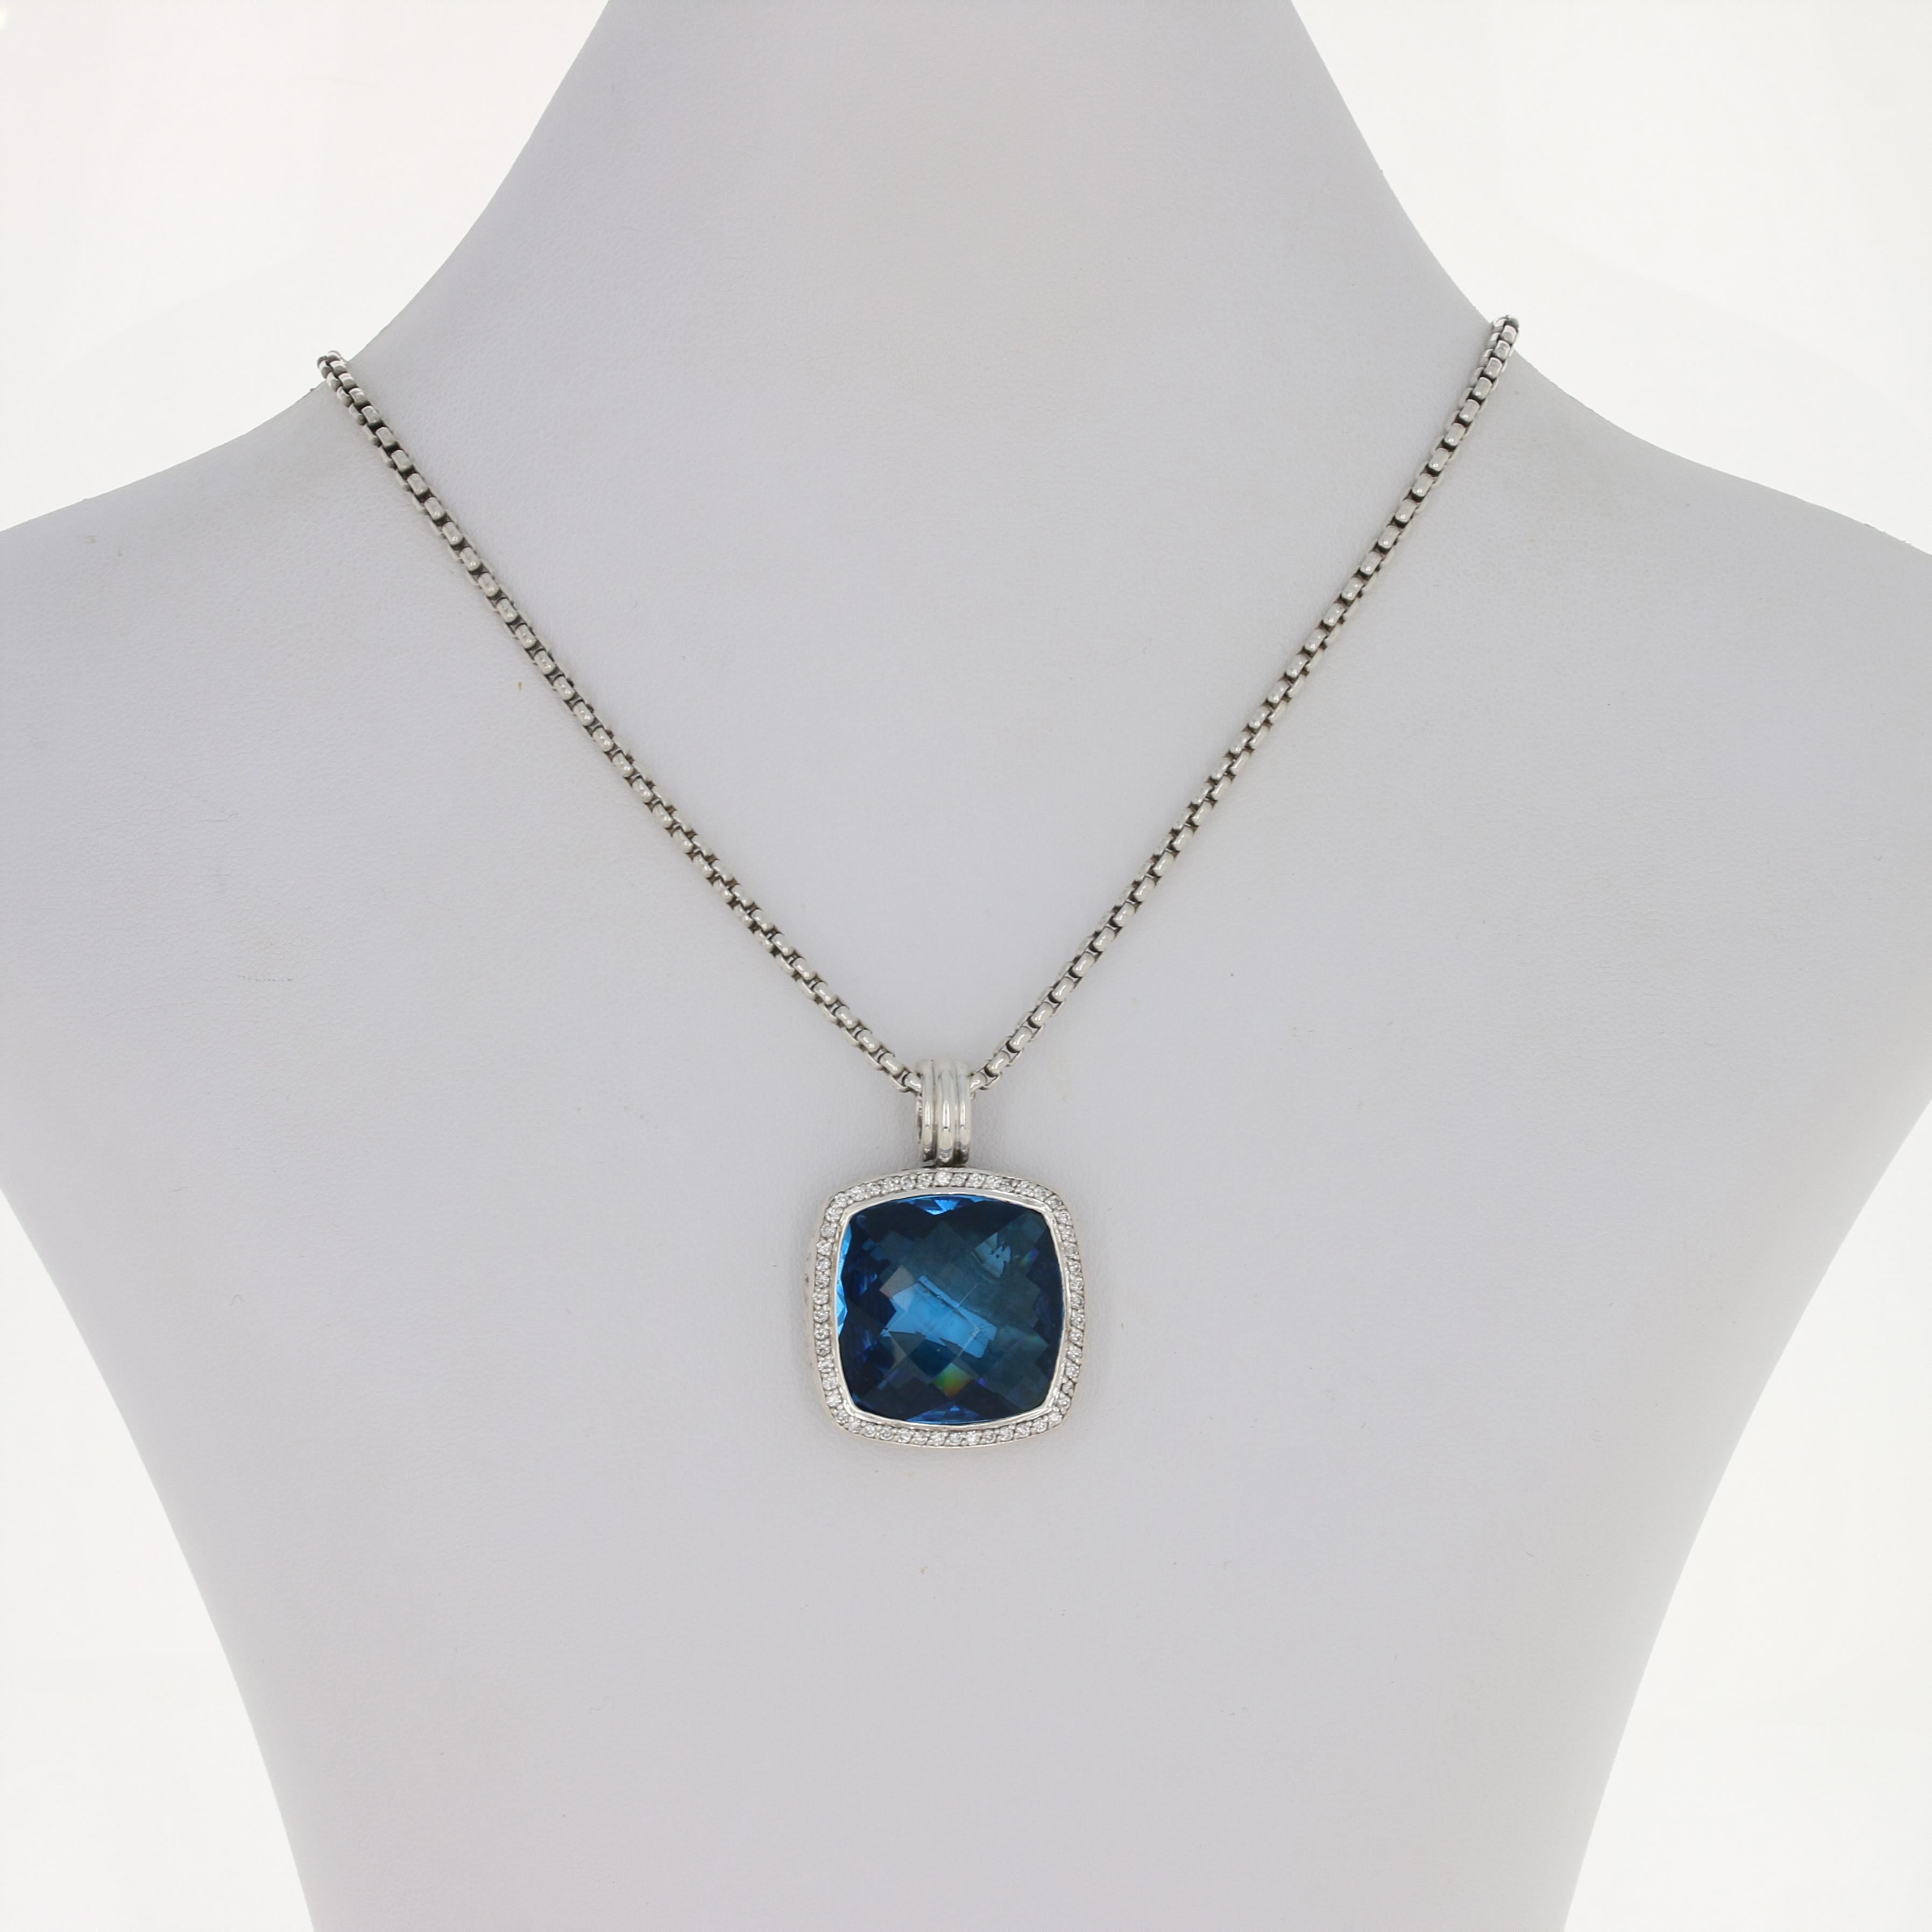 Sparkling like ocean water, this sterling silver piece by David Yurman will be a wonderful addition to your collection! This classic box chain necklace showcases an enhancer pendant adorned with a stunning 20mm Hampton blue topaz framed by a